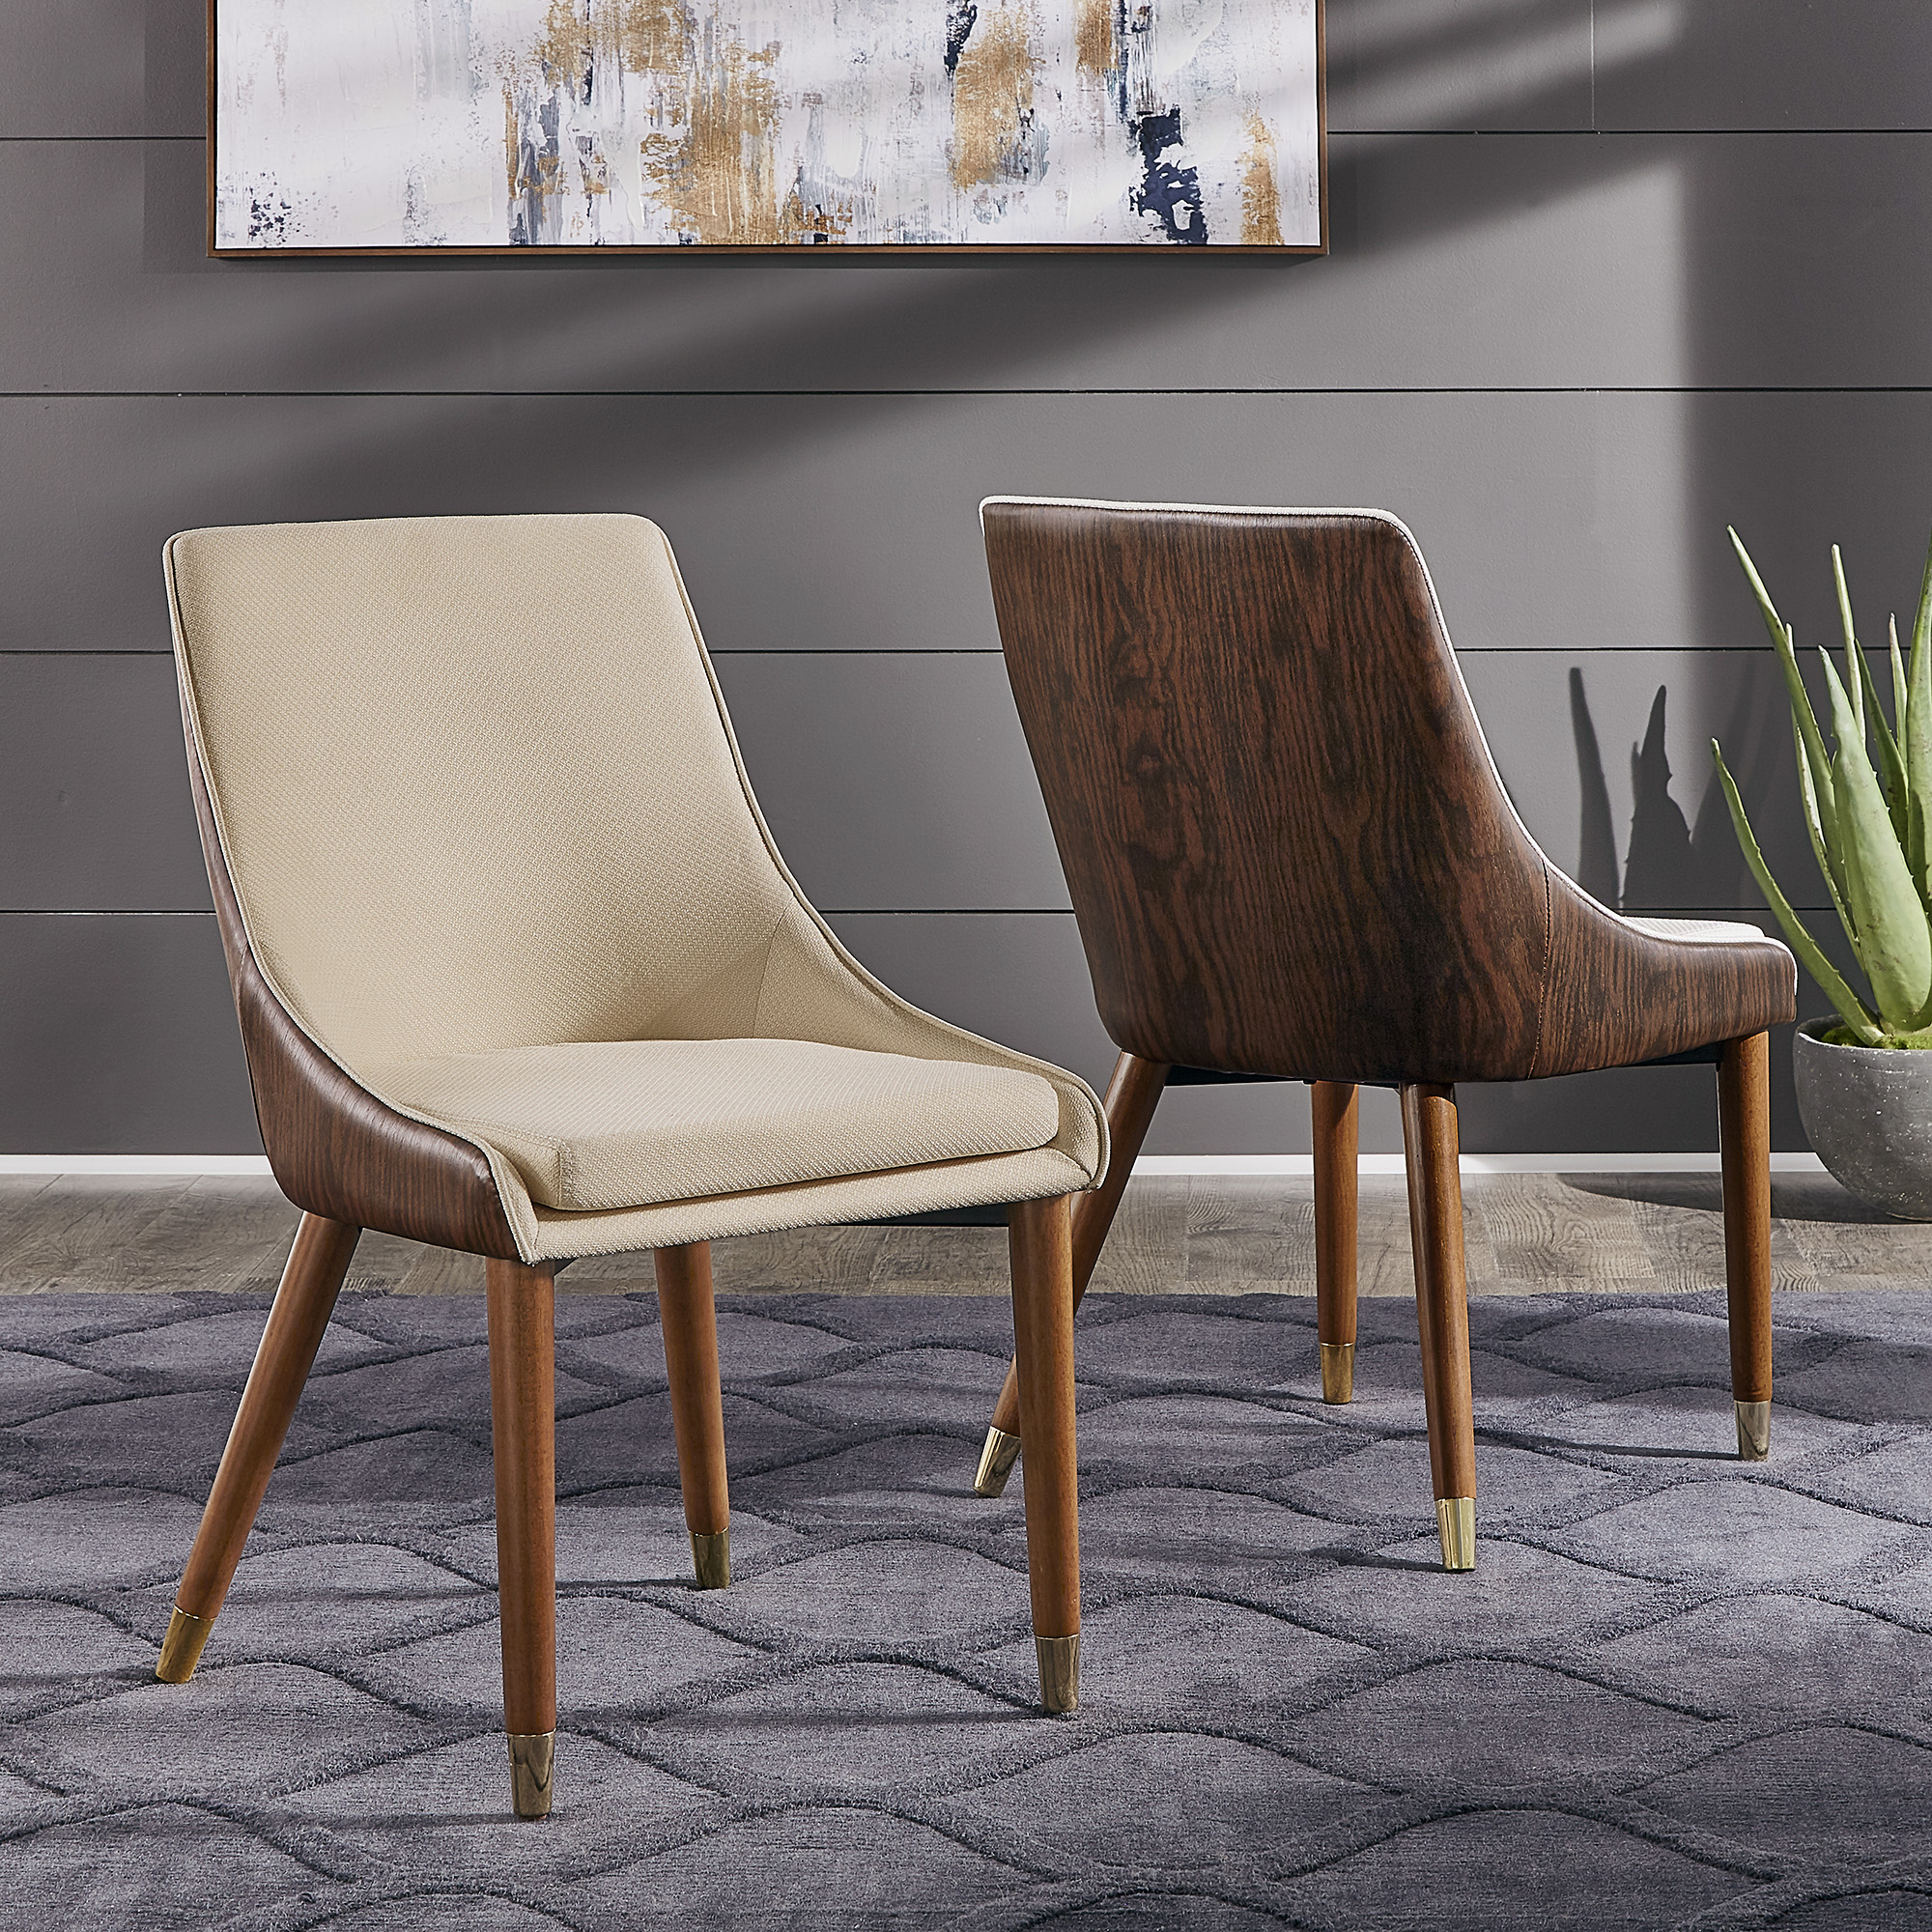 Two-Tone Faux Leather Upholstered Dining Chairs (Set of 2) by iNSPIRE Q